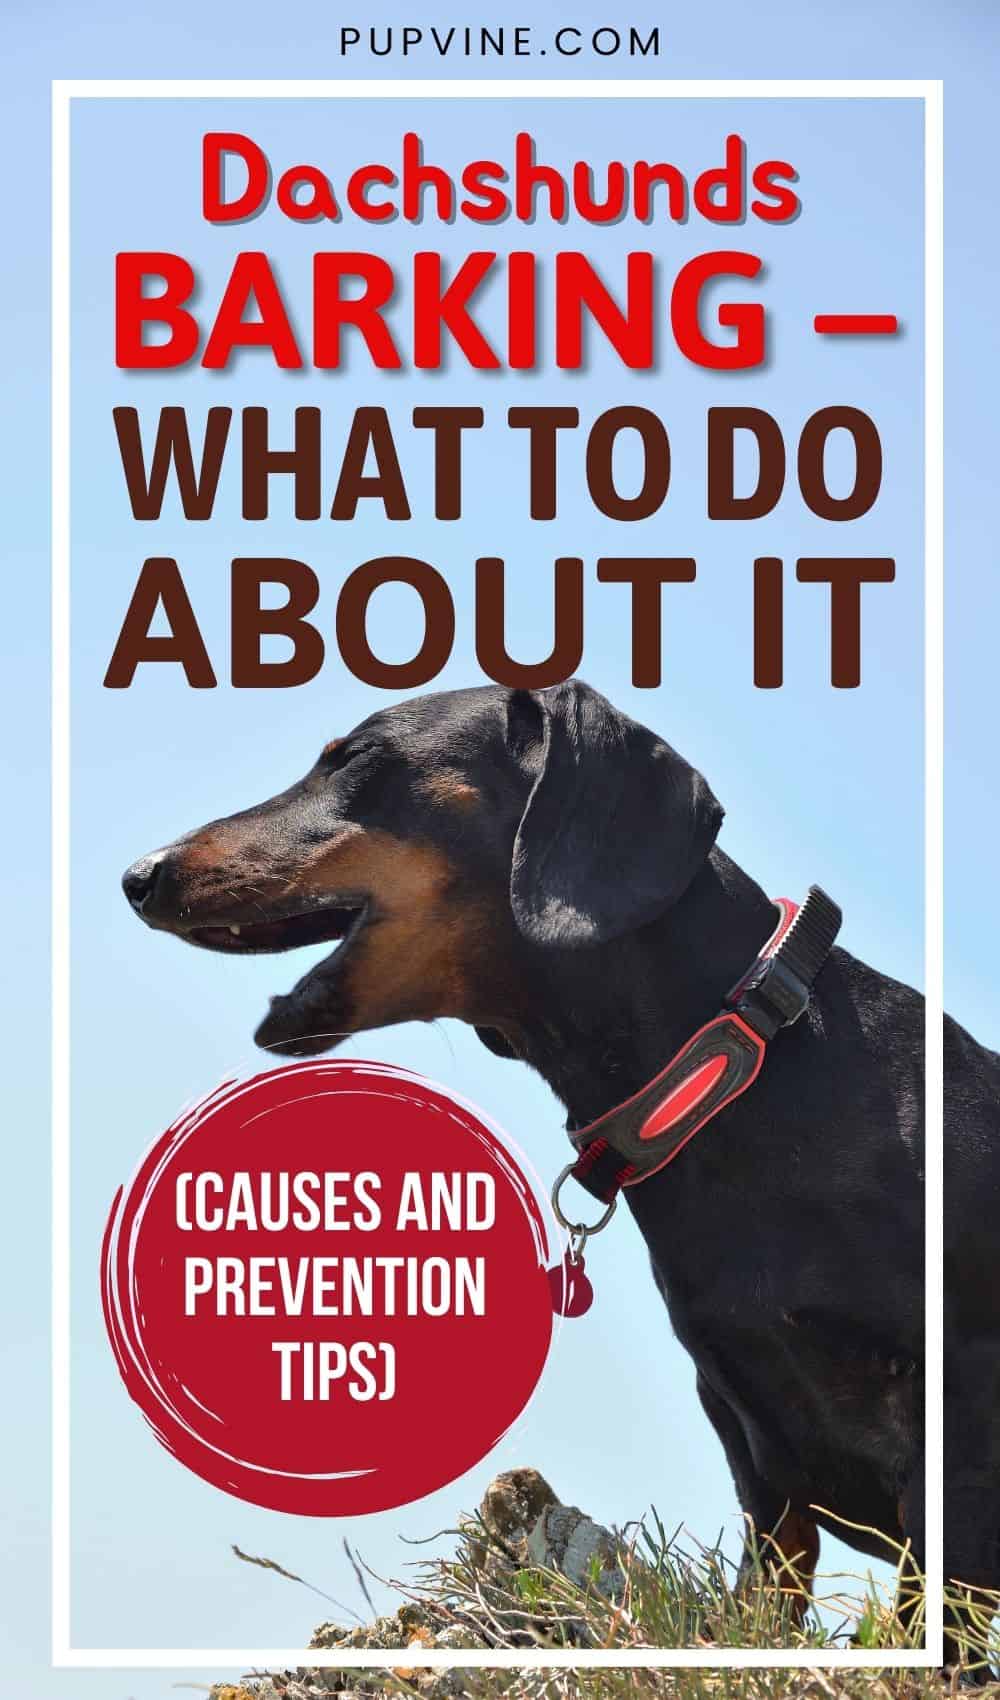 Dachshunds Barking – What To Do About It (Causes And Prevention Tips)